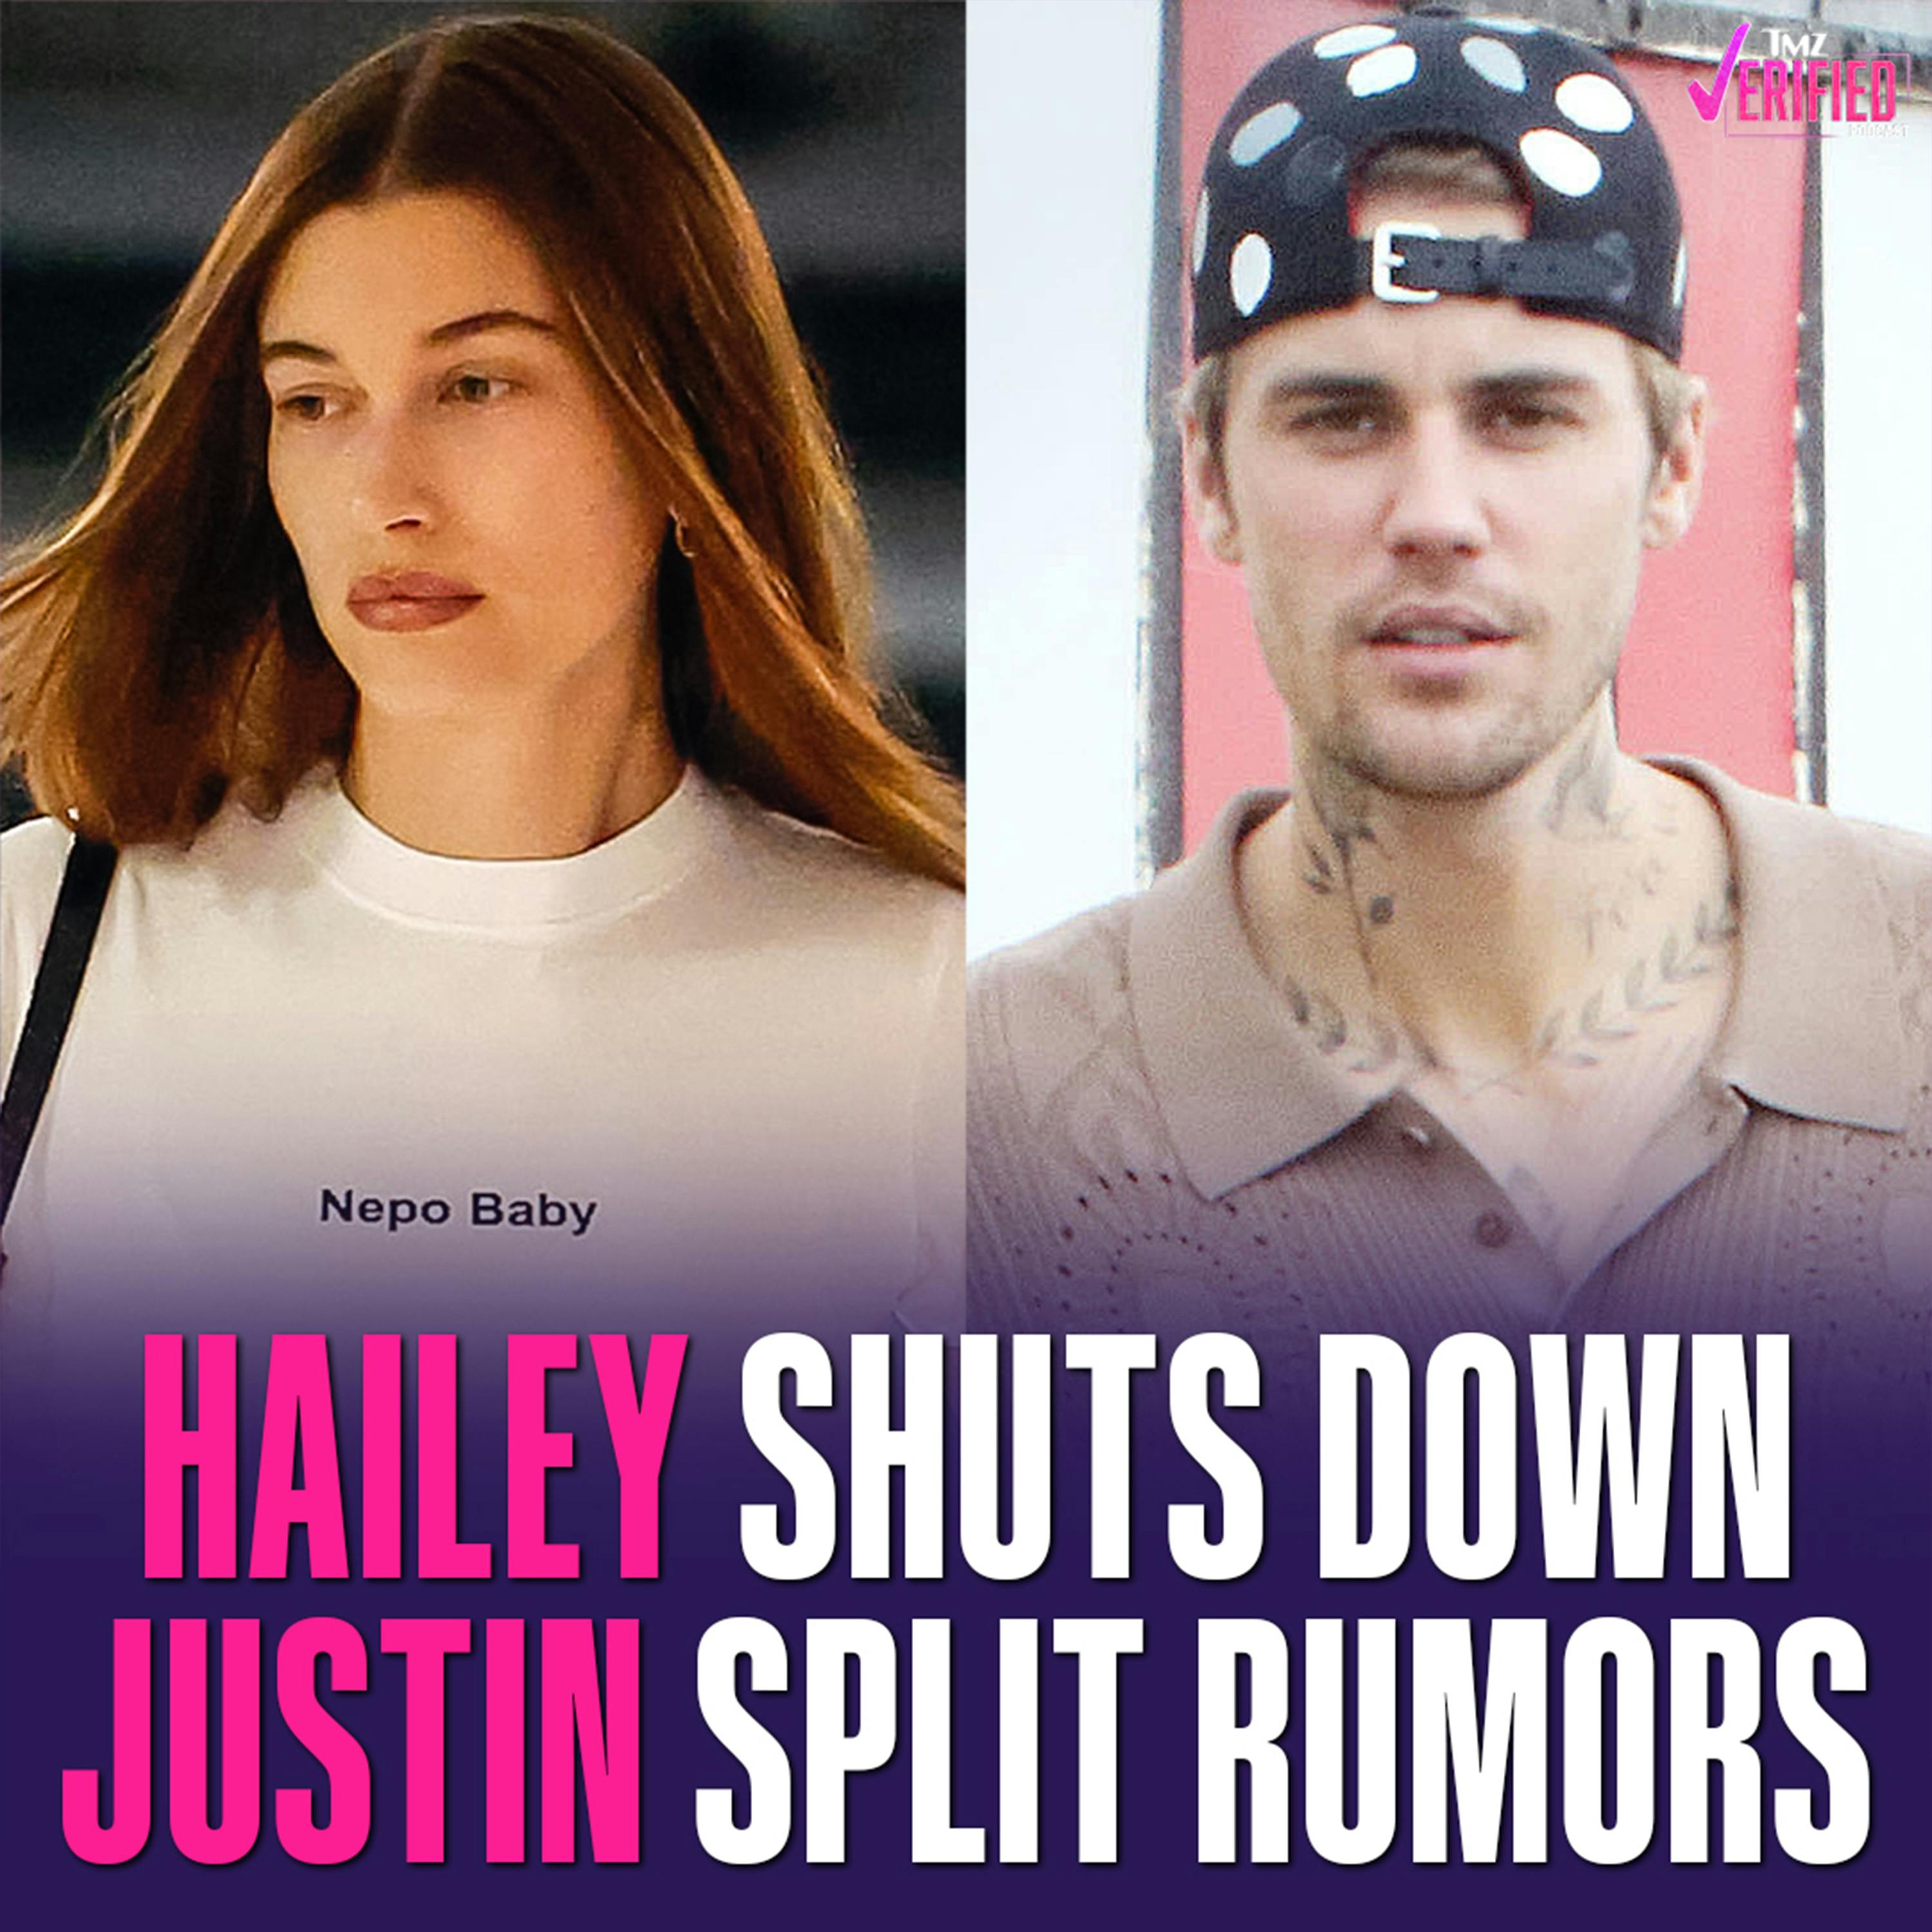 [TMZ Verified Podcast] Hailey Bieber Called Us Delulu: Shuts Down Rumors About Her Marriage to Justin Bieber